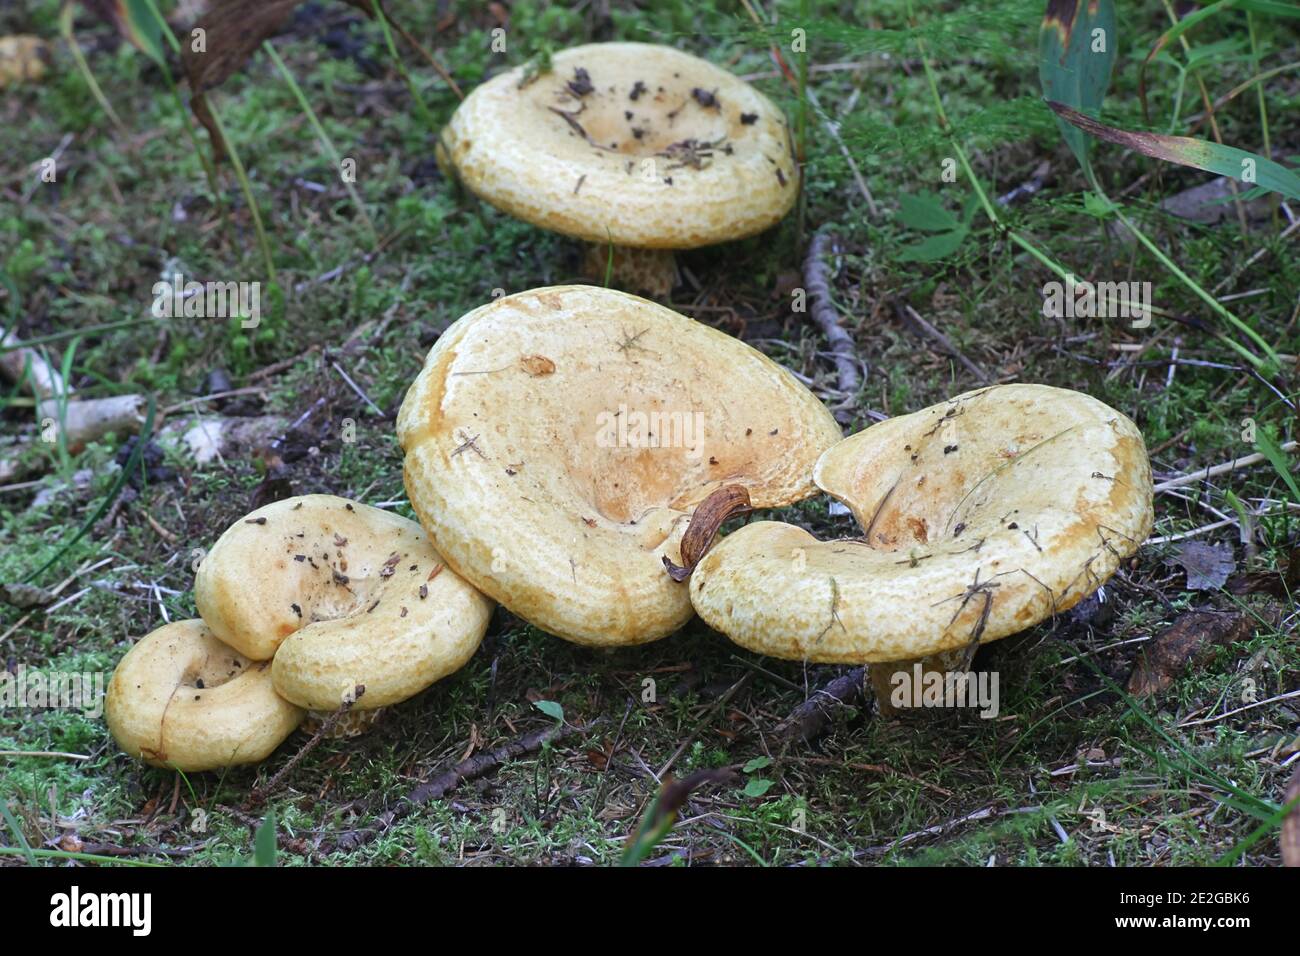 Lactifluus scrobiculatus, also known as Lactarius scrobiculatus, commonly called the spotted milkcap, wild mushroom from Finland Stock Photo